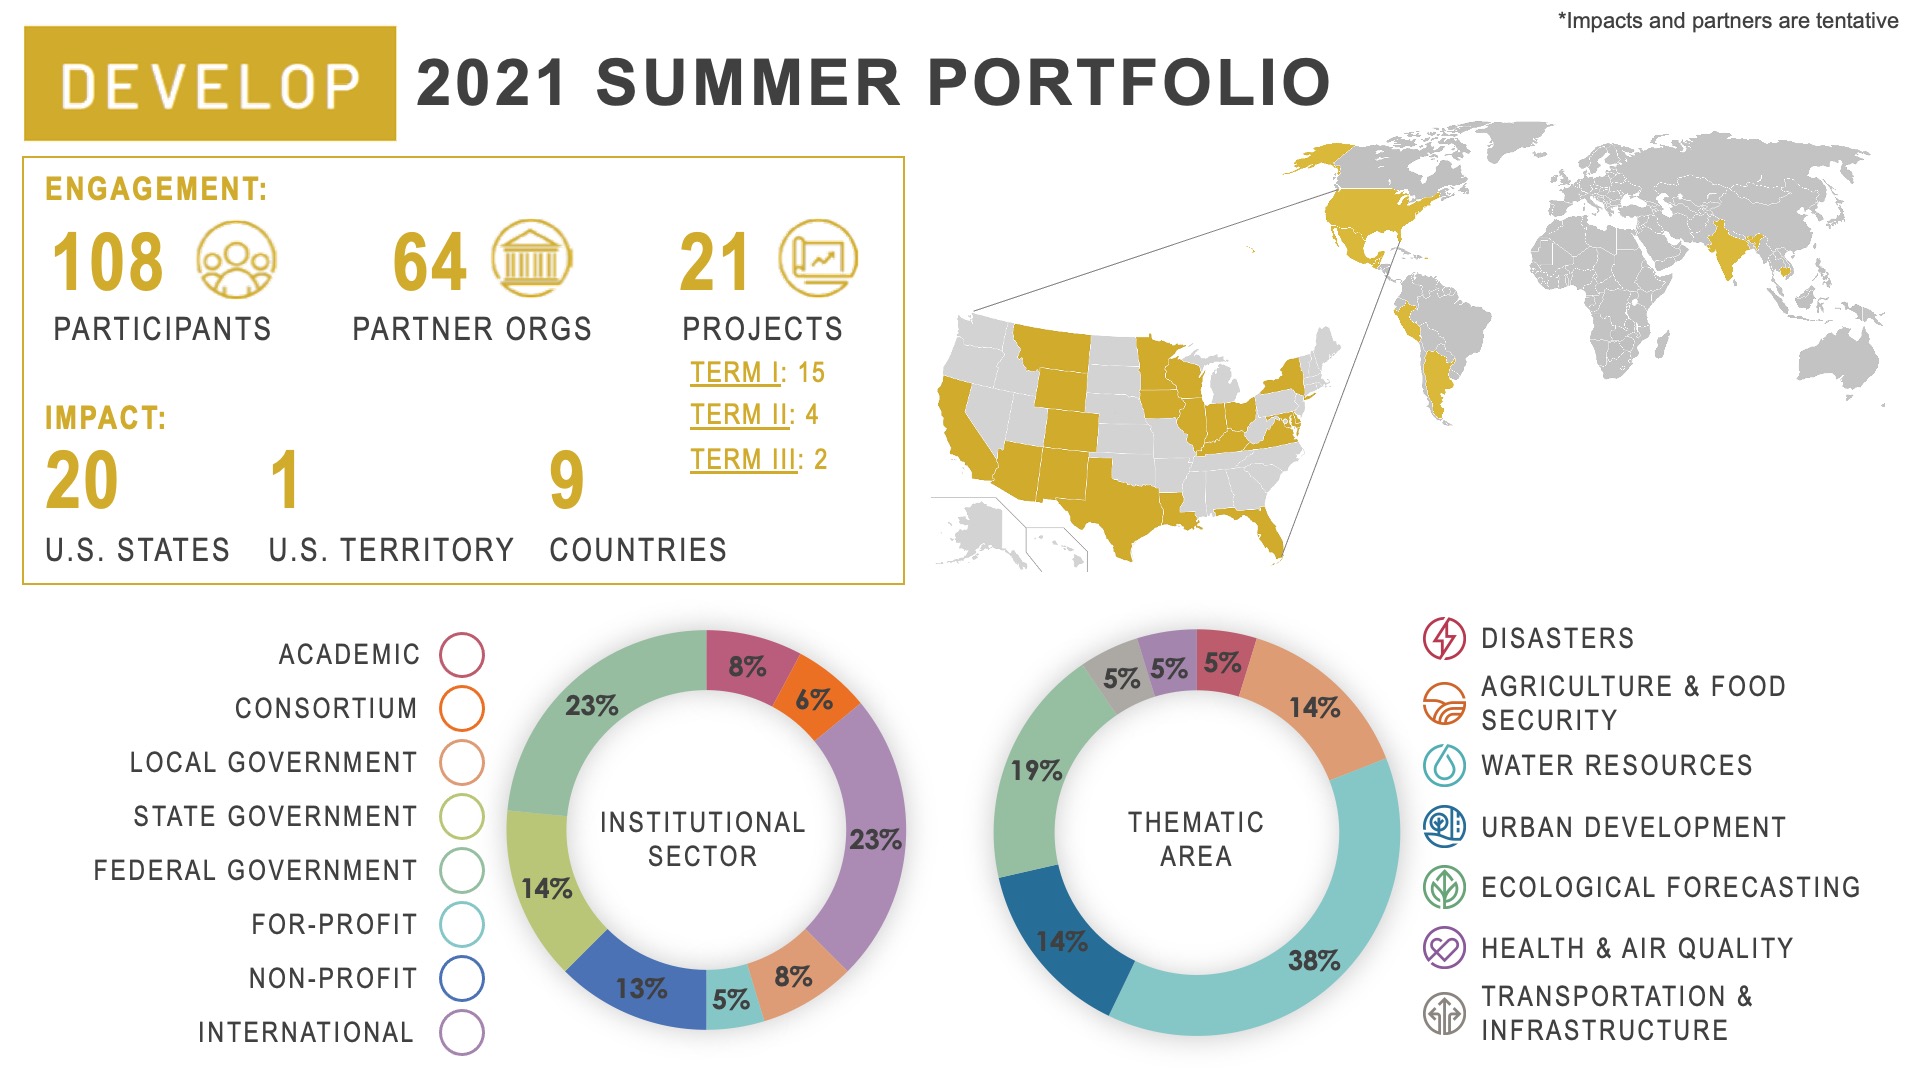 2021 Summer PortfolioEngagement:• 108 participants• 64 partner organizations• 21 projects (15 first term, 4 second term, 2 third term)Impact:• 20 U.S. States• 1 U.S. Territory• 9 CountriesInstitutional sector:• 8% Academic• 6% Consortium• 8% Local government• 14% State government• 23% Federal government• 5% For-profit• 13% Non-profit• 23% InternationalThematic area:• 5% Disasters• 14% Food security & Agriculture• 38% Water resources• 14% Urban development• 19% Ecological forecasting• 5% Transportation & Infrastructure• 5% Health & Air quality